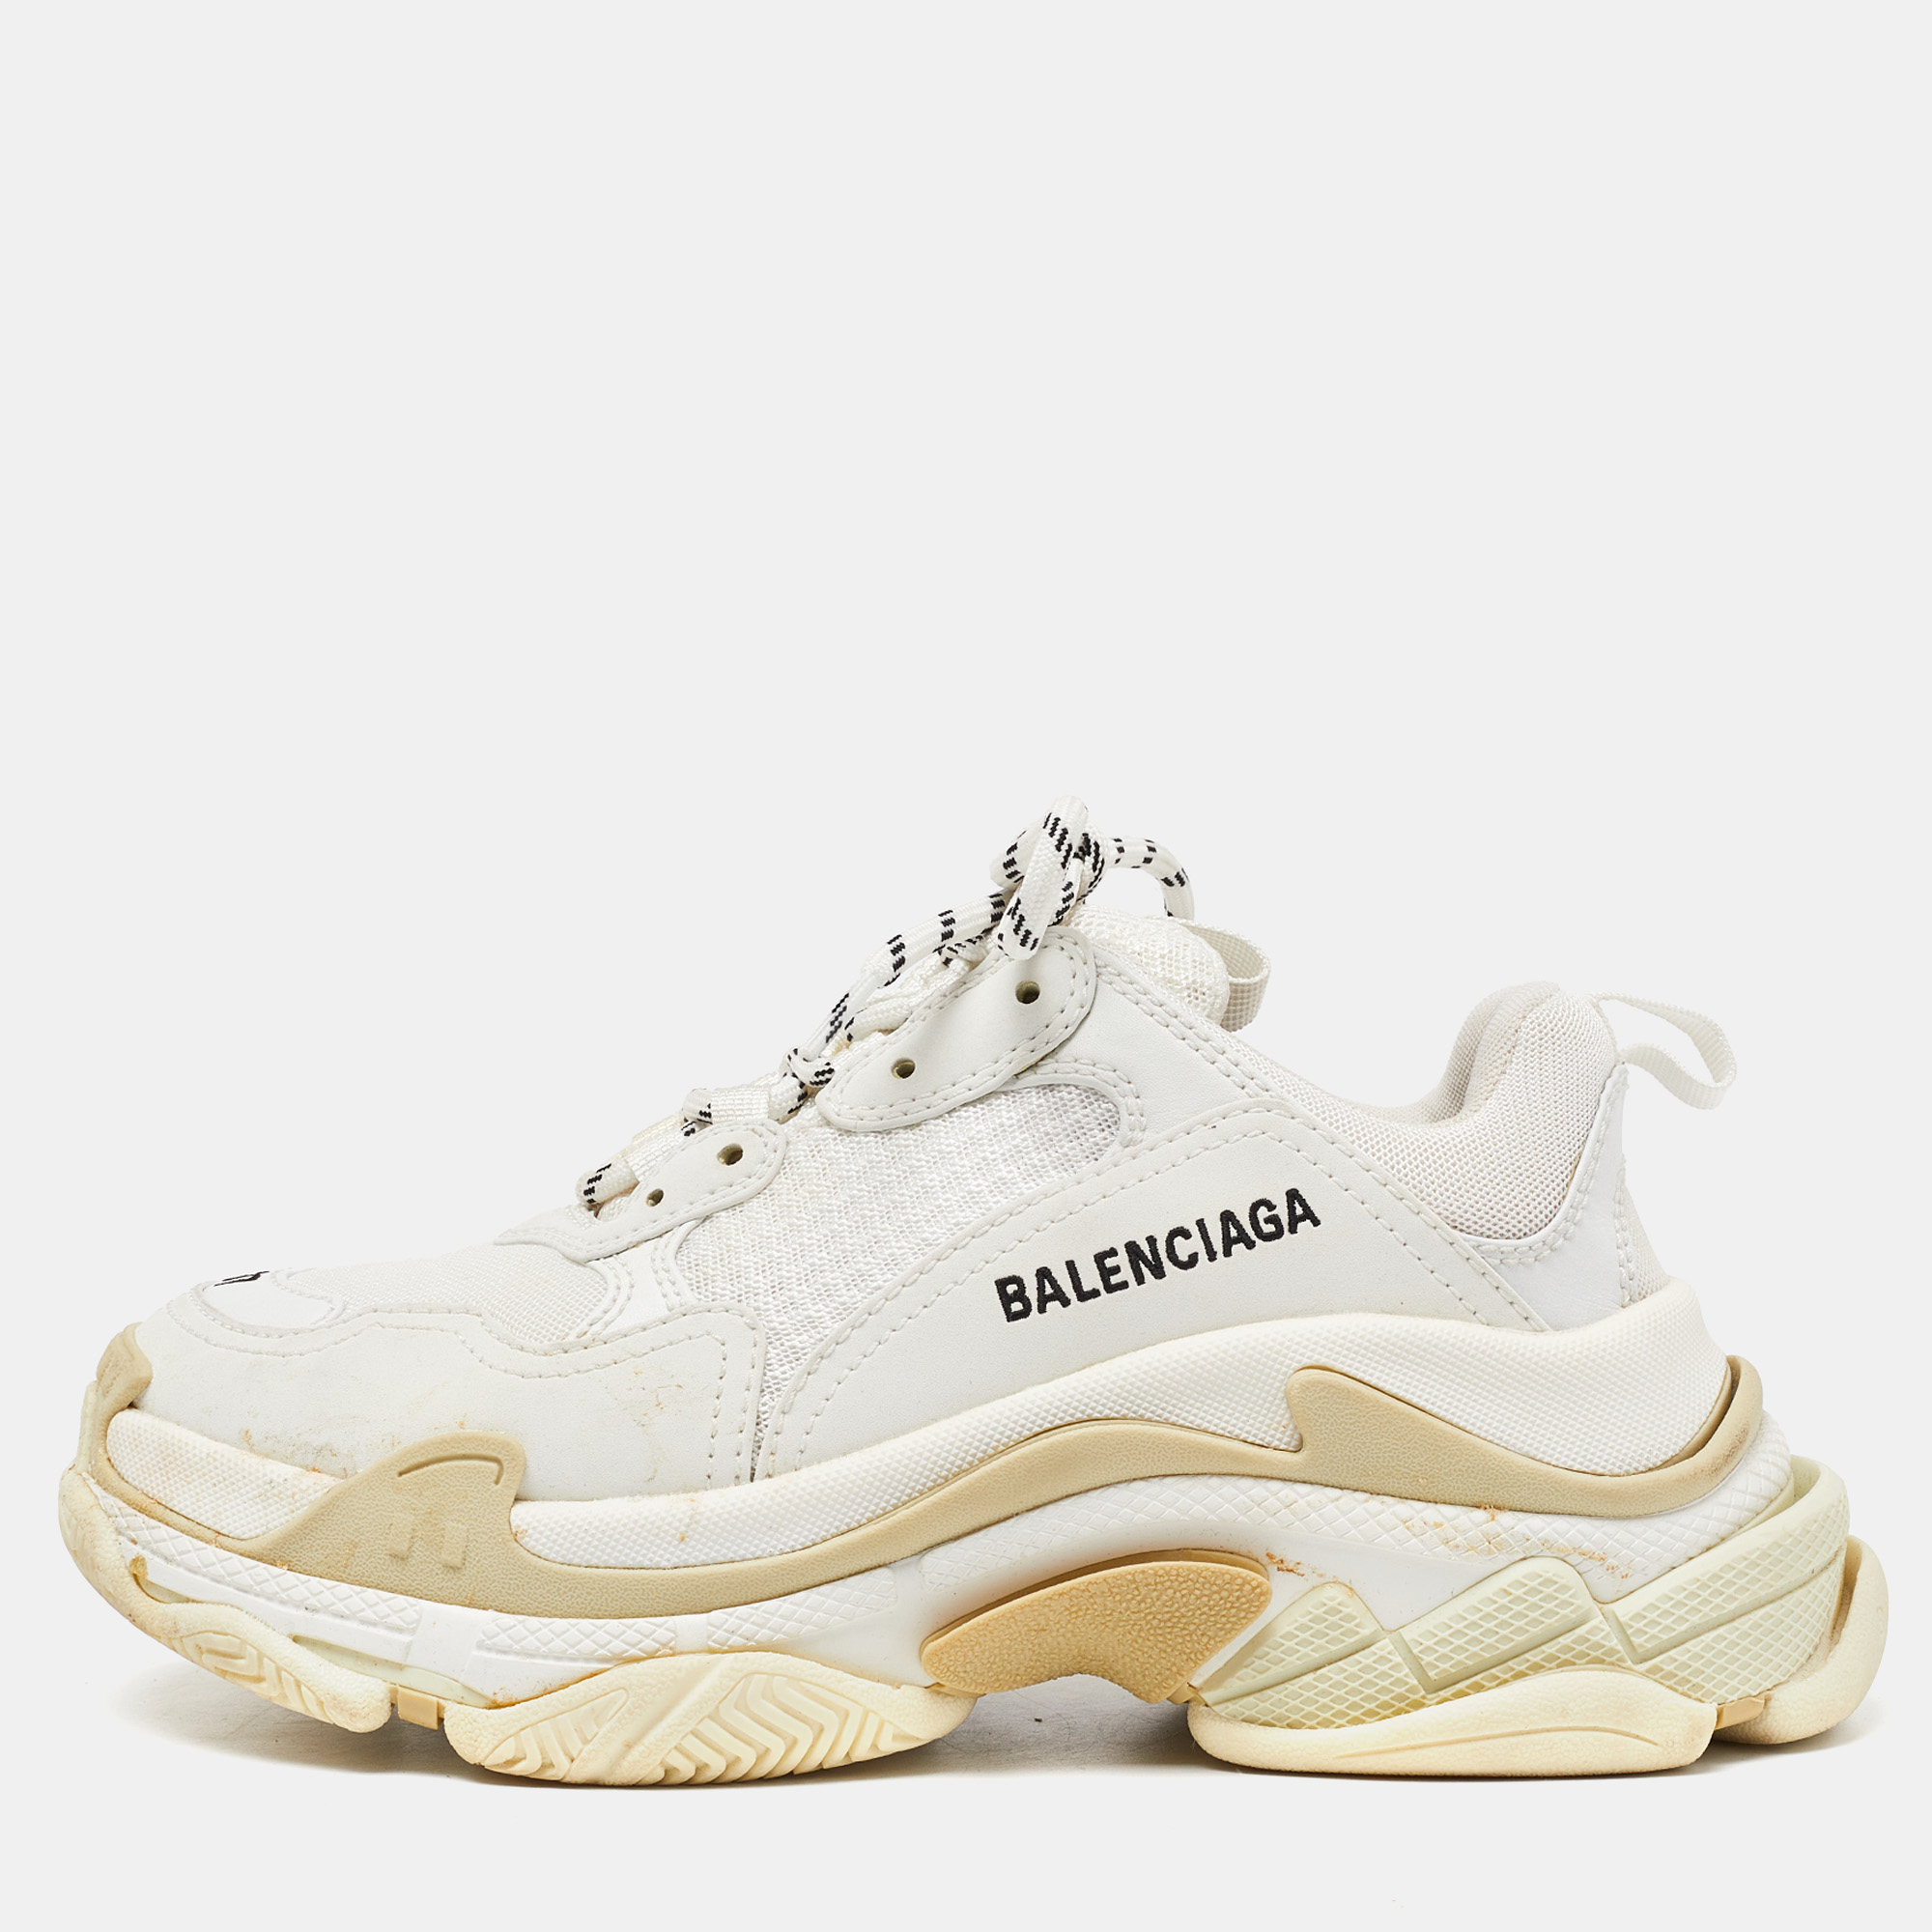 Balenciaga white mesh and faux leather triple s lace up sneakers size 37